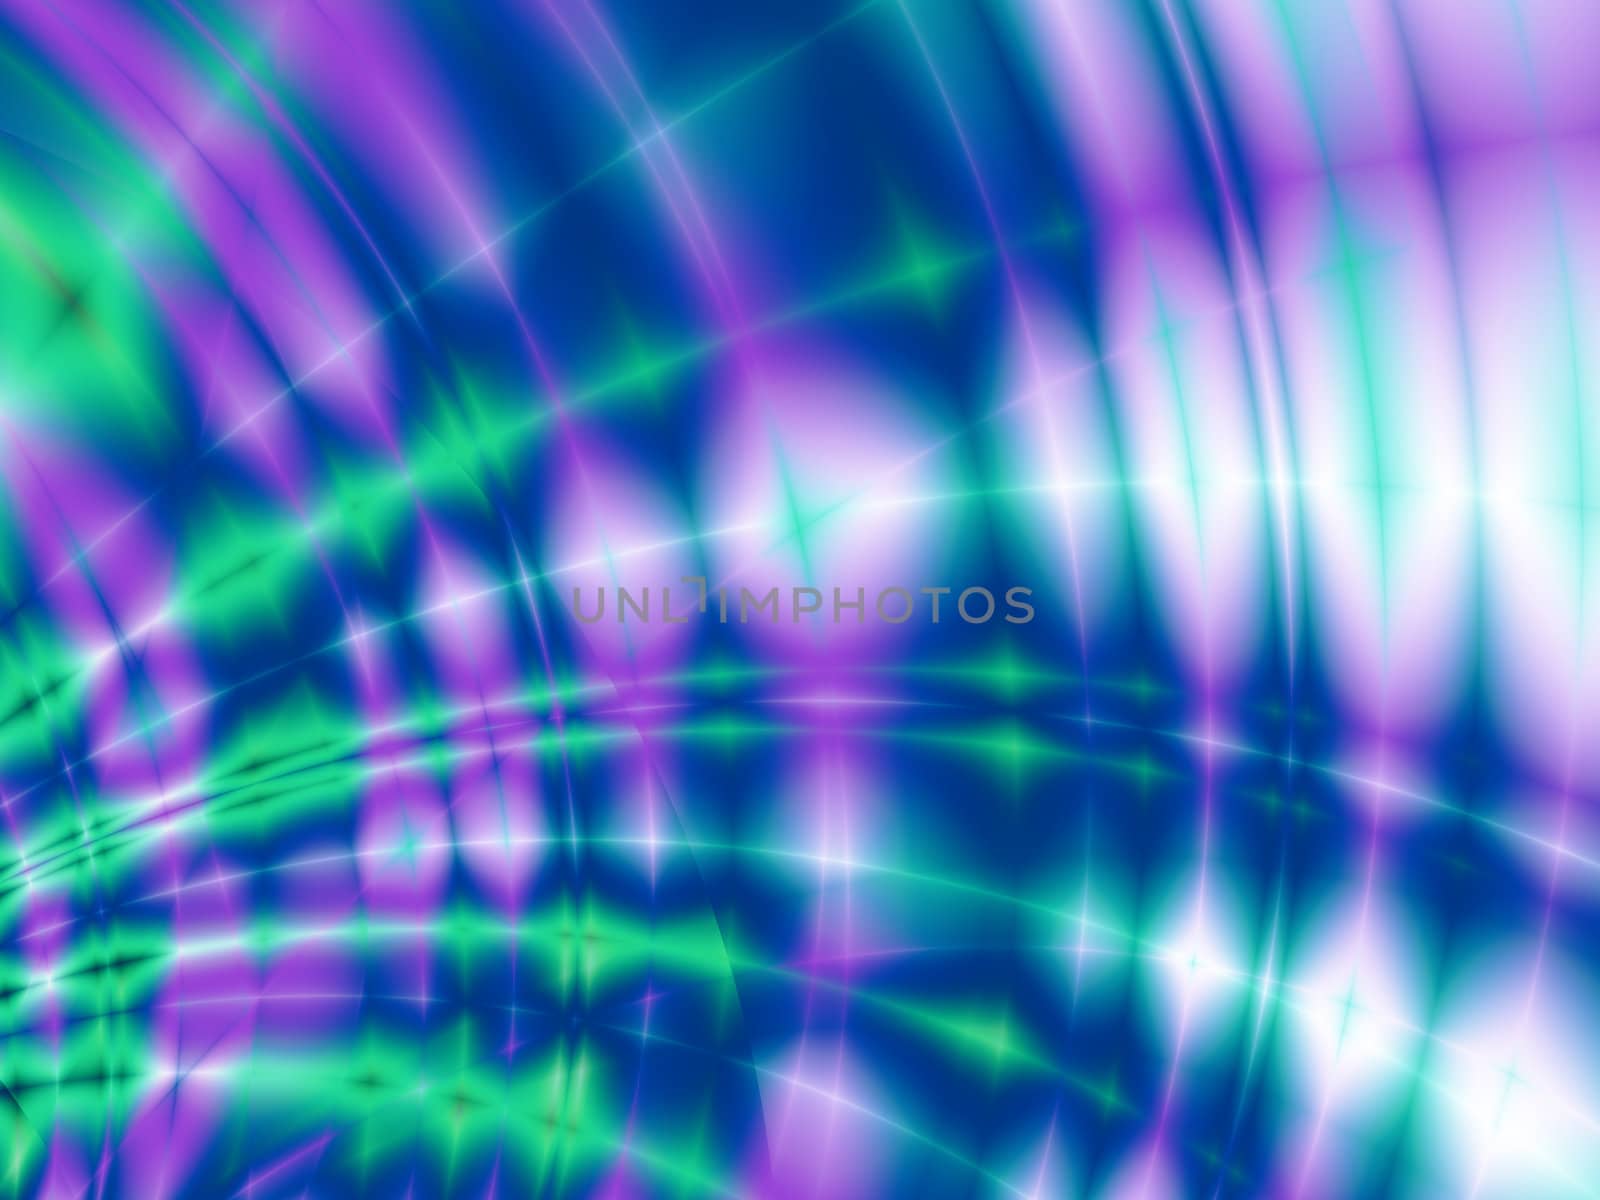 Freakish abstract green violet and blue patterns and waves